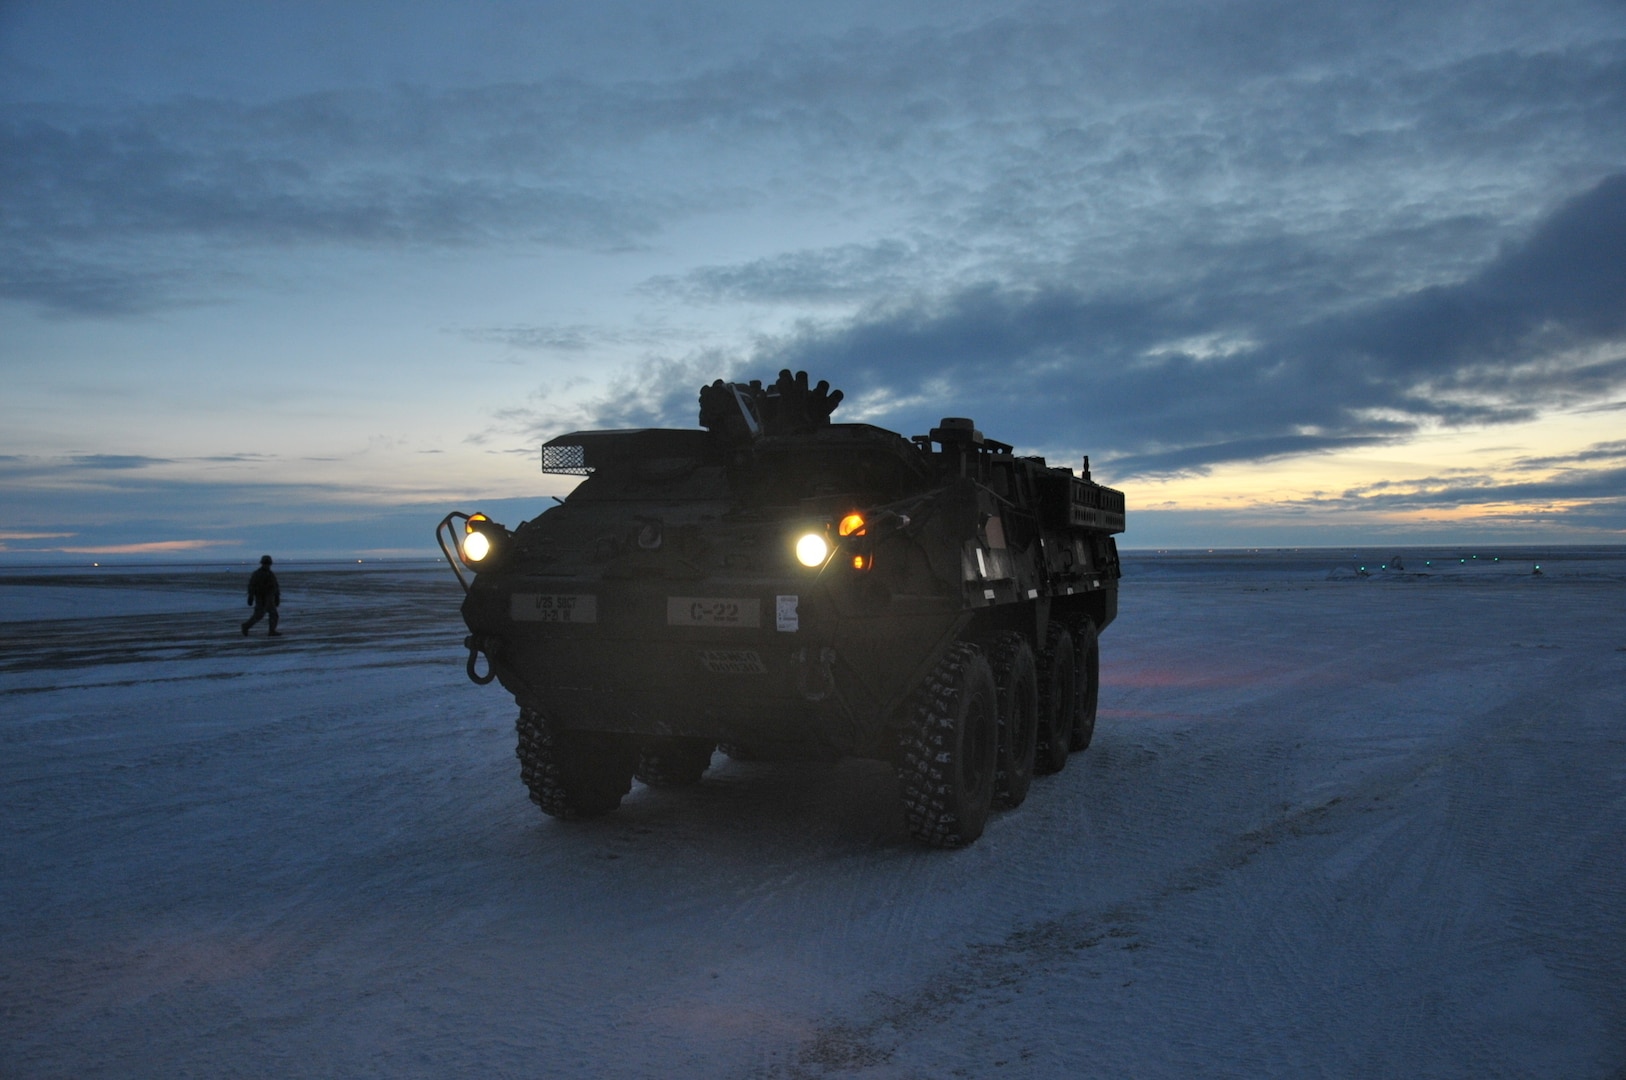 A U.S. Army Alaska Stryker from Bravo Company, 3-21 Infantry Regiment, 1st Stryker Brigade Combat Team, drives down the flight line after offloading from an Air Force C-17 Globemaster above the Arctic Circle as part of Operation Arctic Pegasus at Deadhorse, Alaska, Nov. 3, 2015. Arctic Pegasus is U.S. Army Alaska's annual joint exercise designed to test rapid-deployment and readiness in the Arctic. The exercise marks the first time Strykers have deployed above the Arctic Circle. The 1st Stryker Brigade Combat Team is the Army's northernmost unit and has the unique capability to deploy and operate in extreme cold regions. (Photo by Sgt. 1st Class Joel Gibson, U.S. Army Alaska Public Affairs)